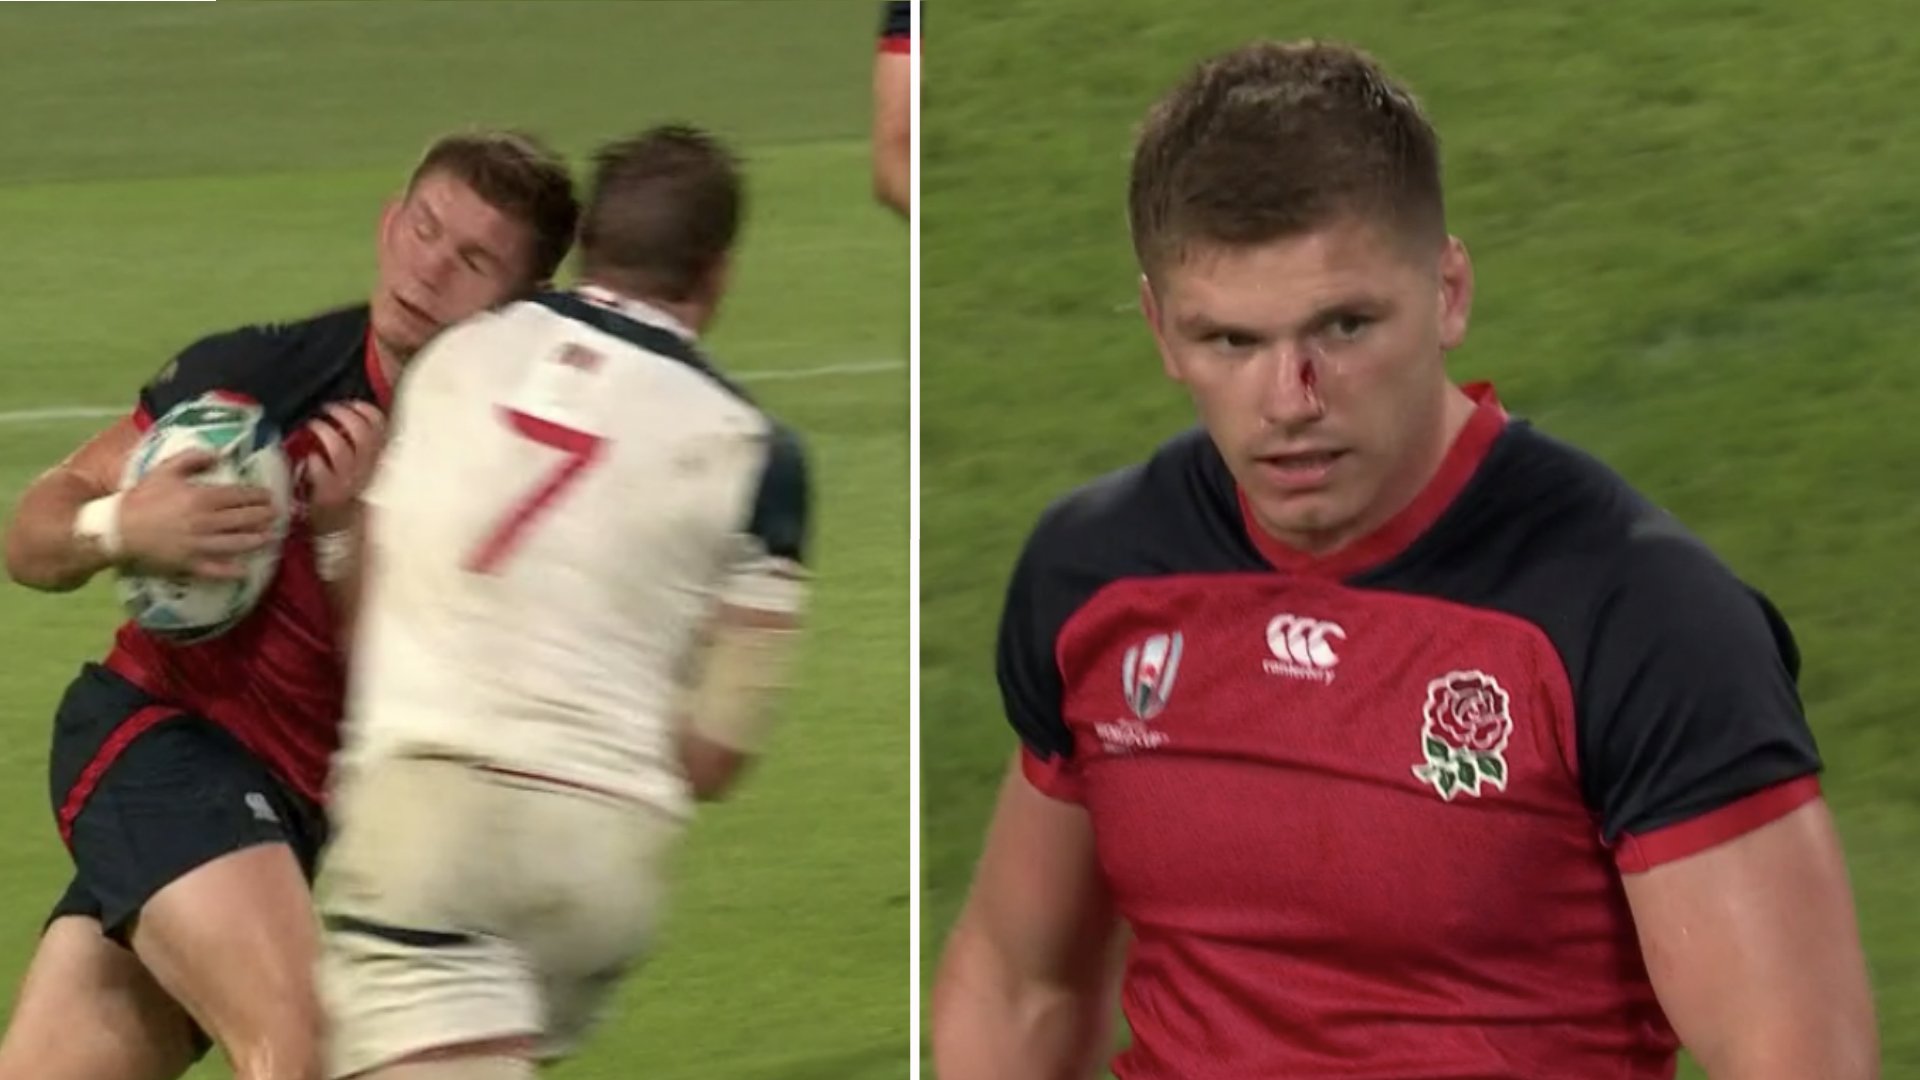 England fans are fuming about this cheap shot on Owen Farrell